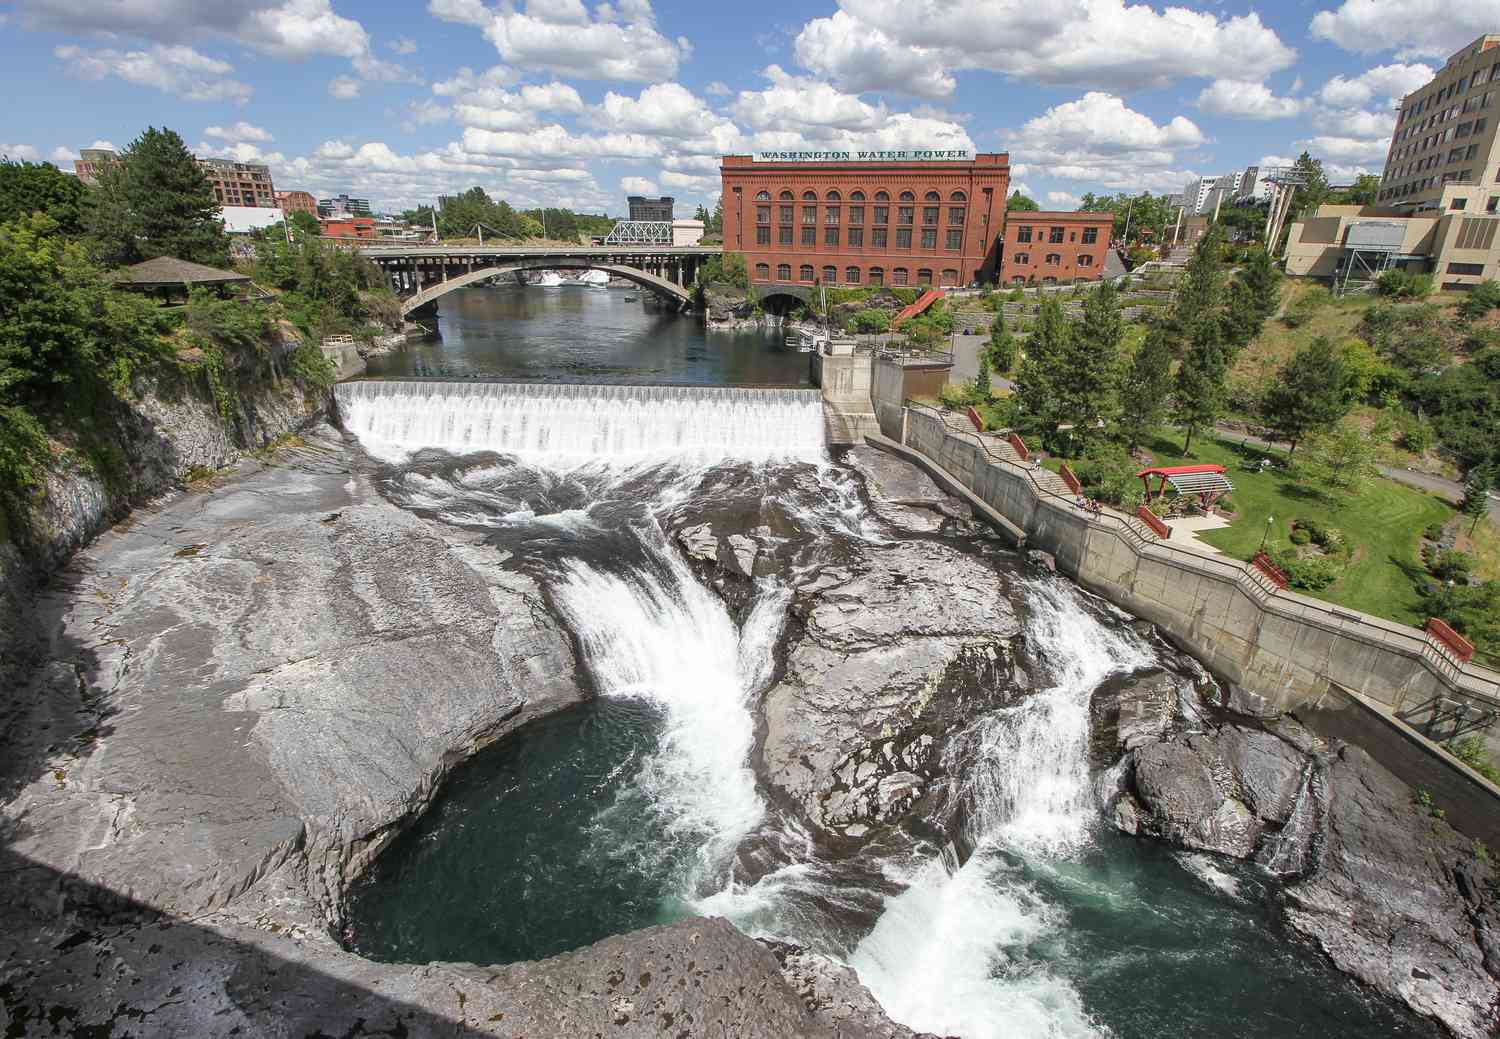 8-facts-about-technological-innovations-in-spokane-washington